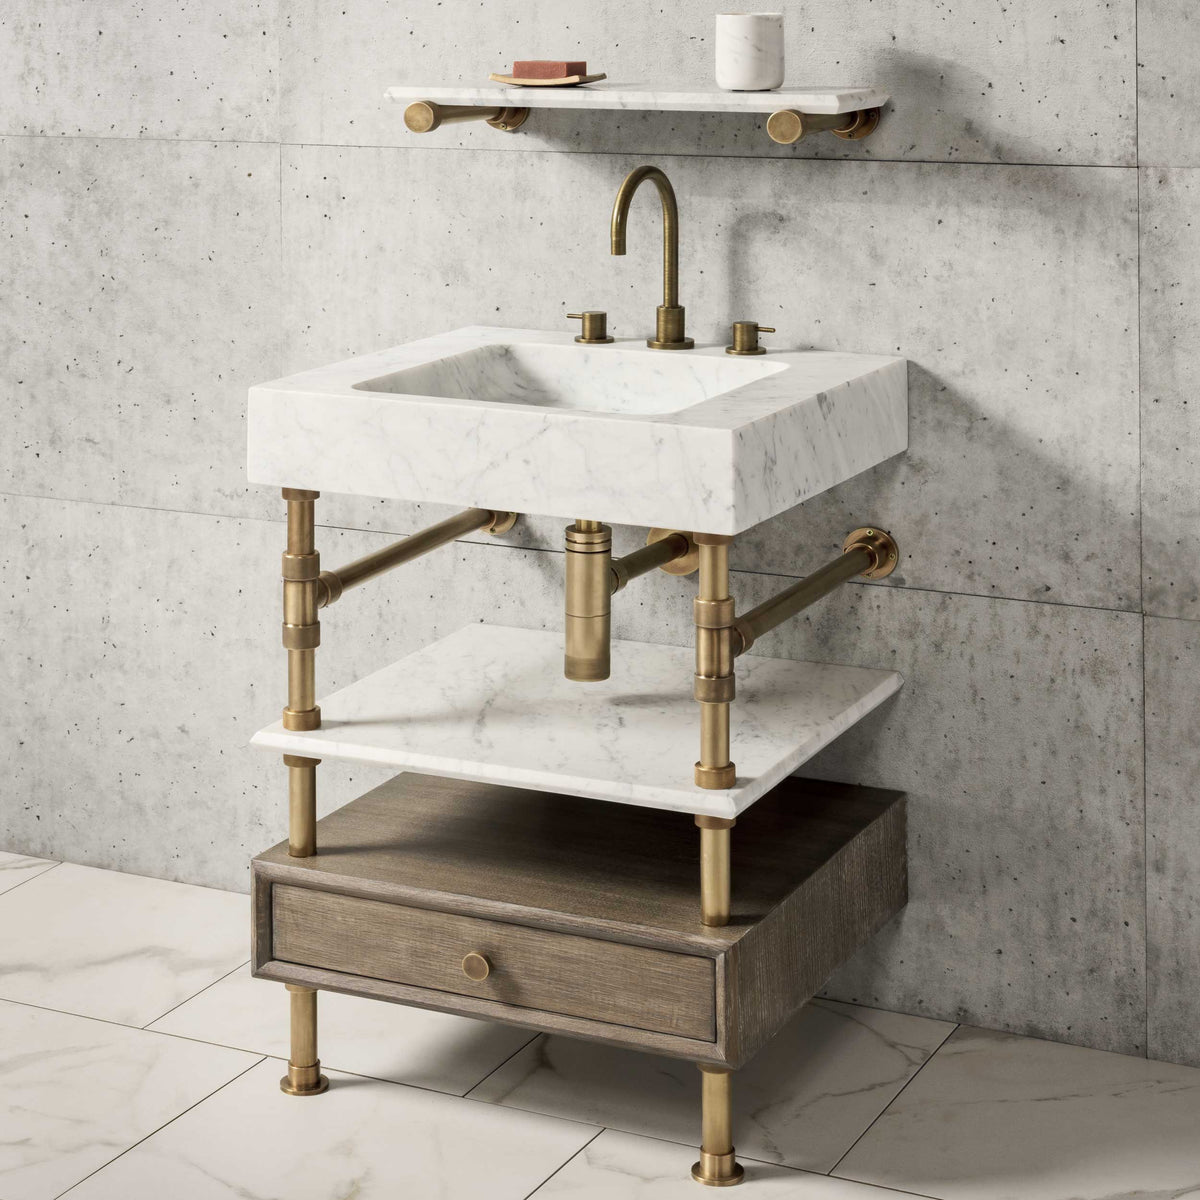 Terra Bath Sink paired with Elemental Classic Console Vanity with stone shelf image 1 of 2